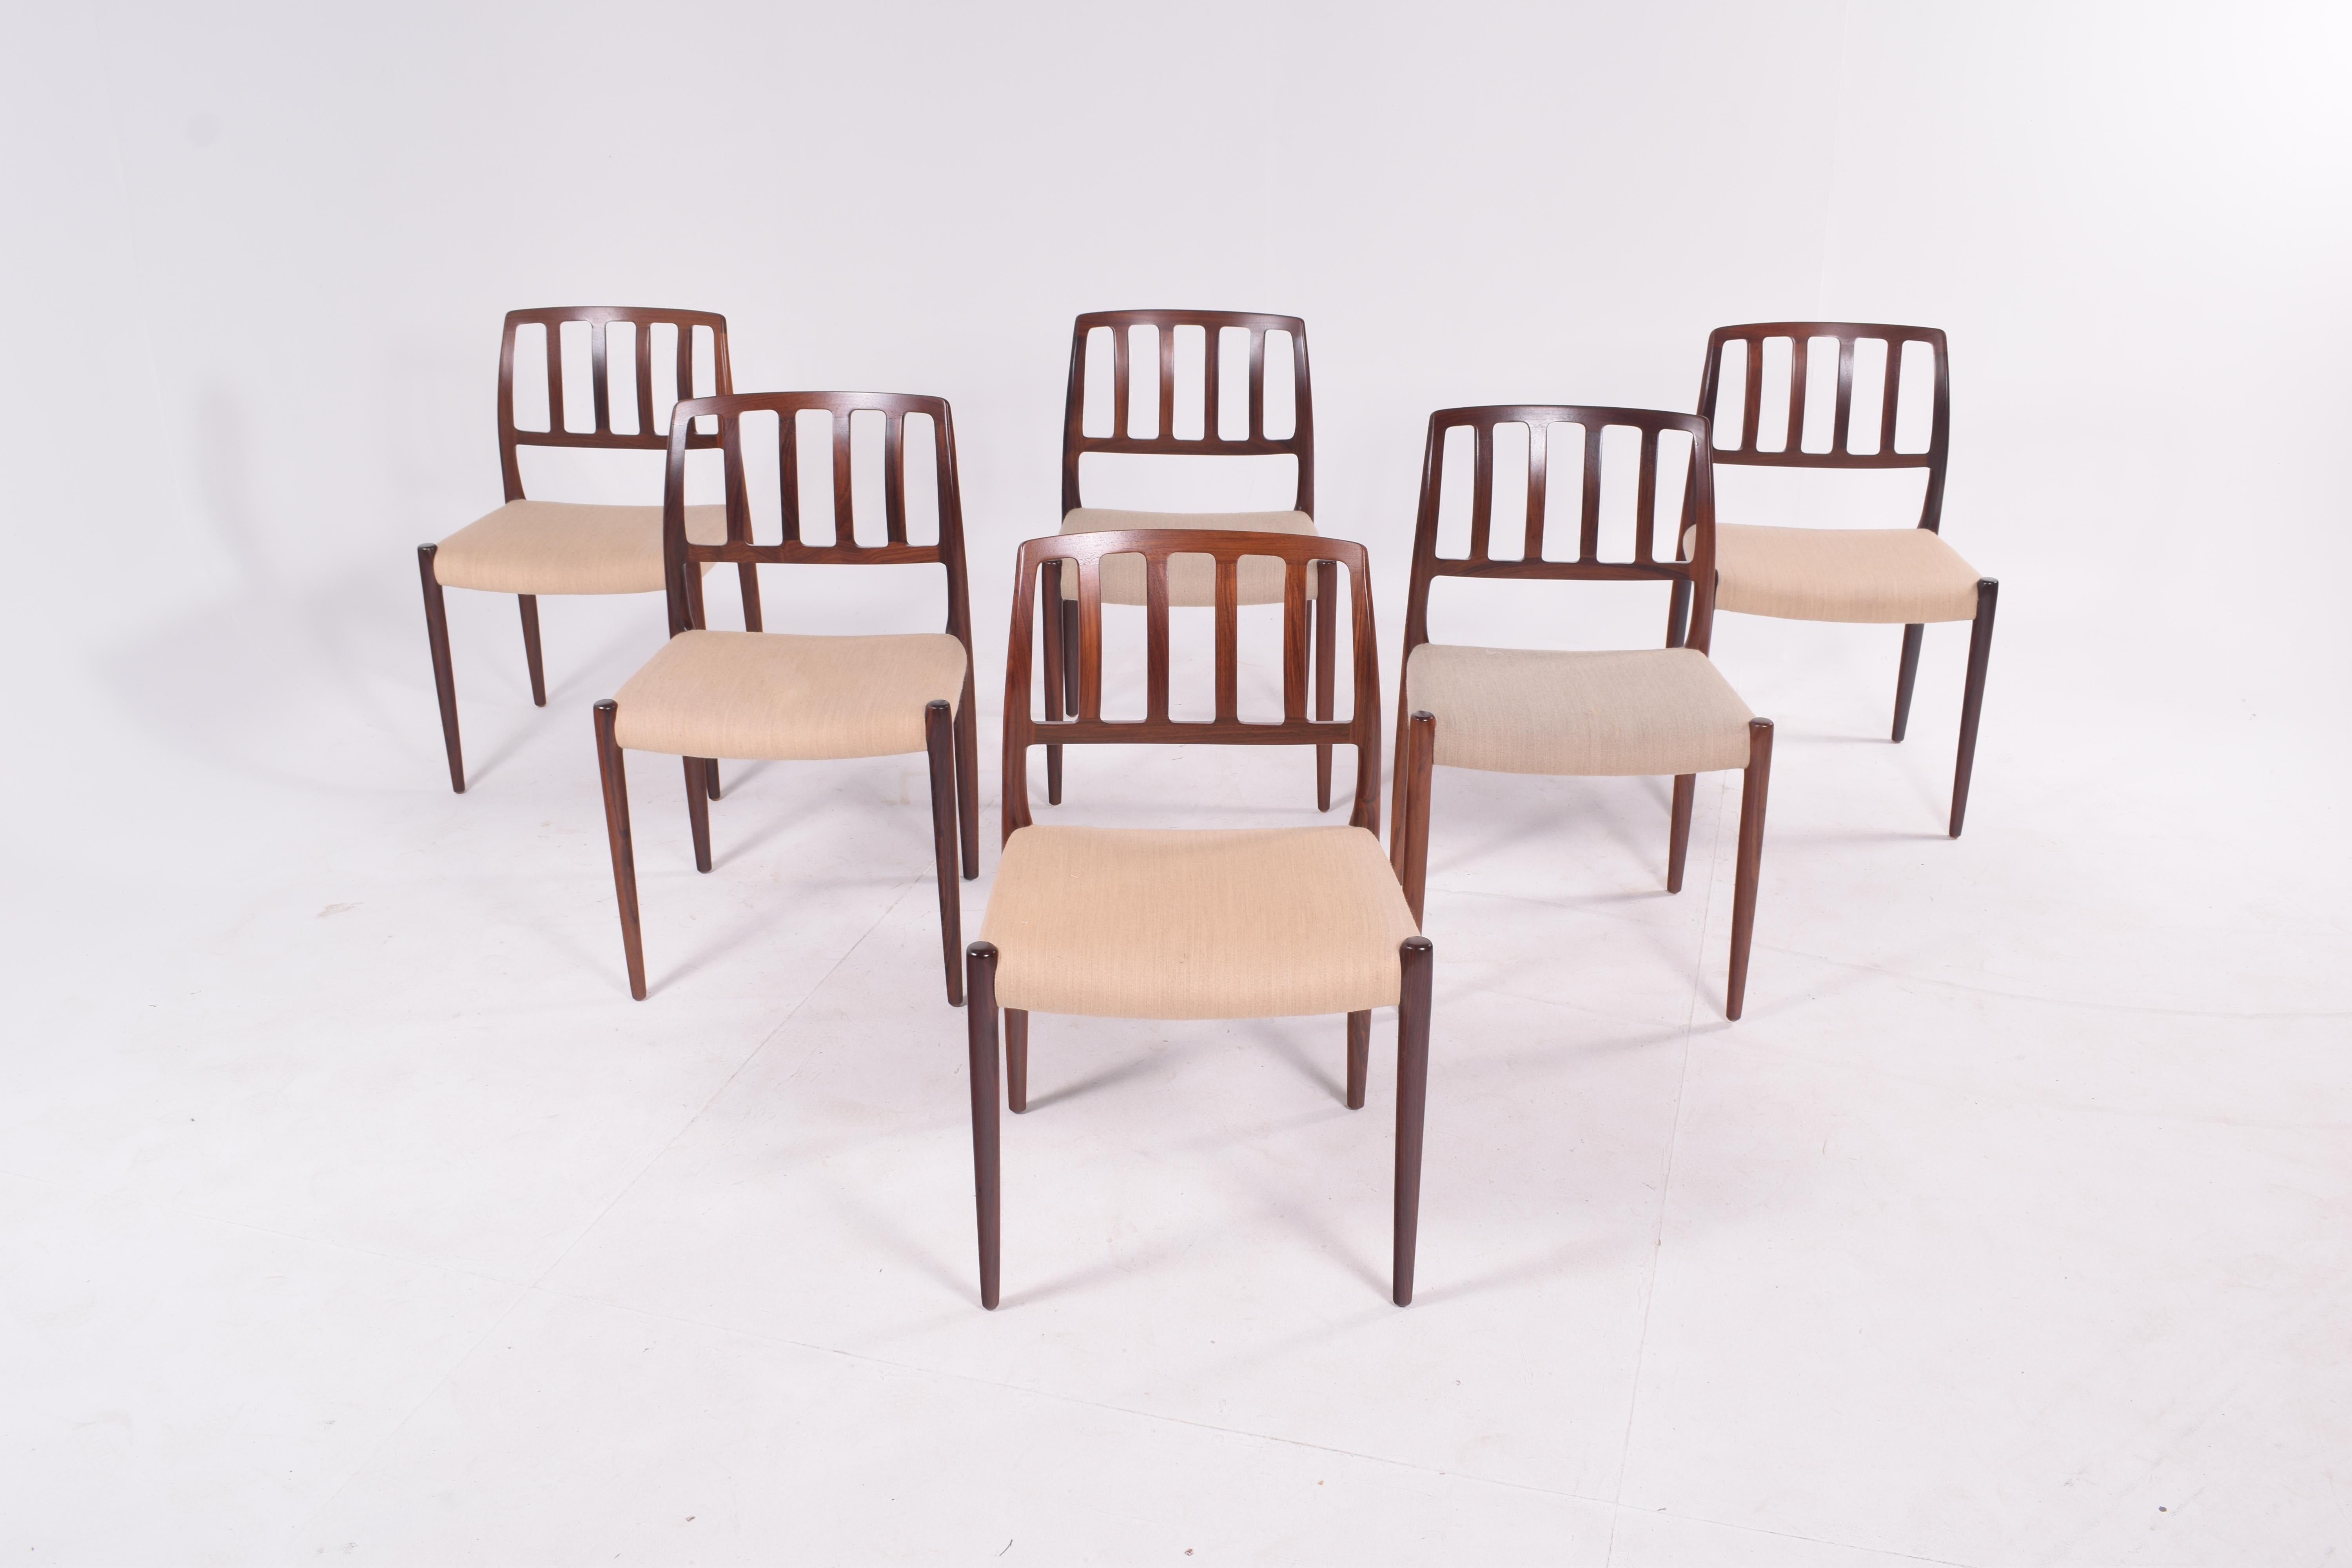 A six-piece set of “Model 83” upholstered rosewood dining chairs designed by Niels Otto Møller for J.L. Møller. Timeless Danish design features solid rosewood frame with smoothly sculpted back and emphatic front legs.